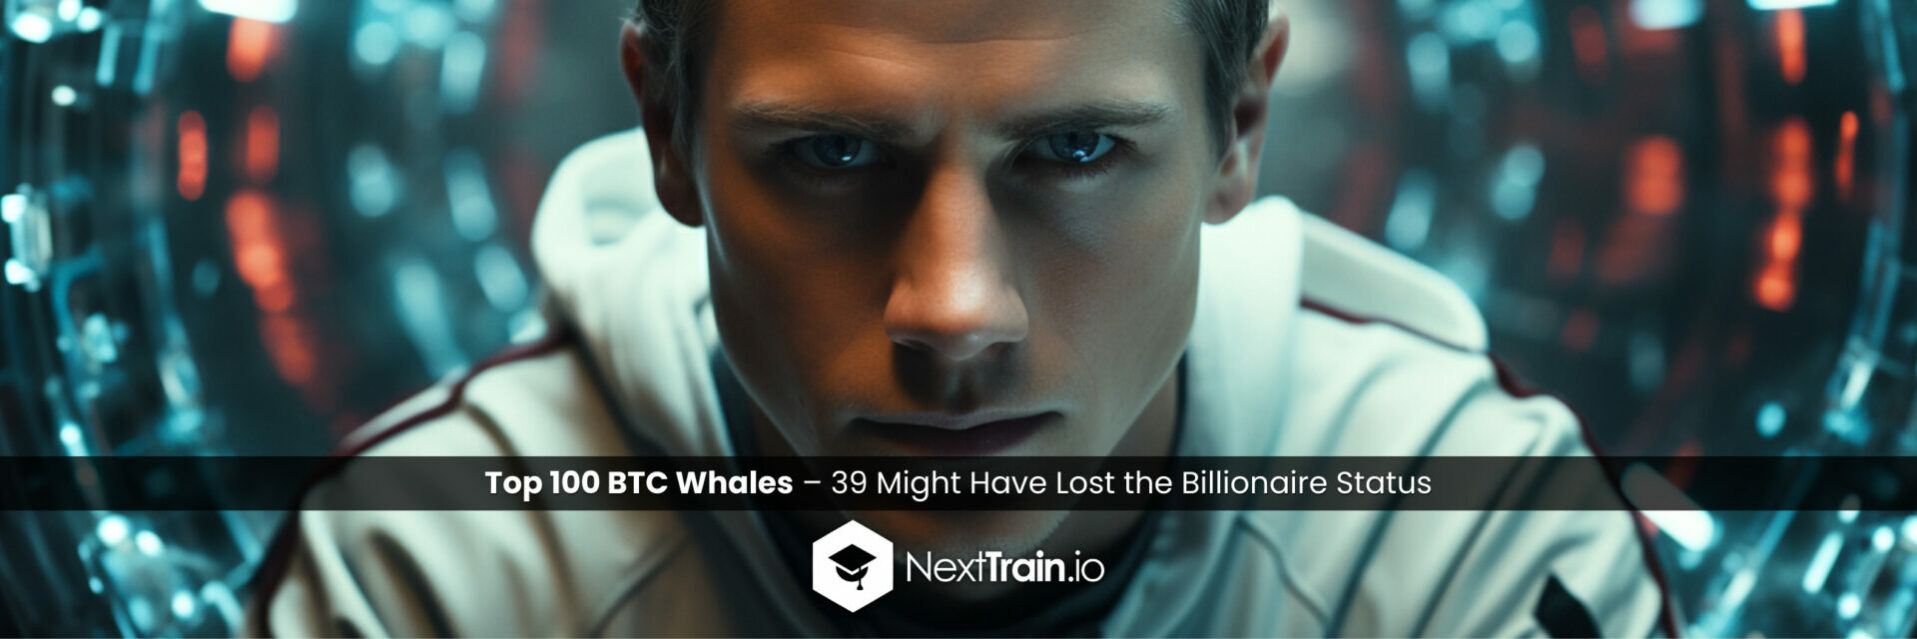 Top 100 BTC Whales - 39 Might Have Lost the Billionaire Status